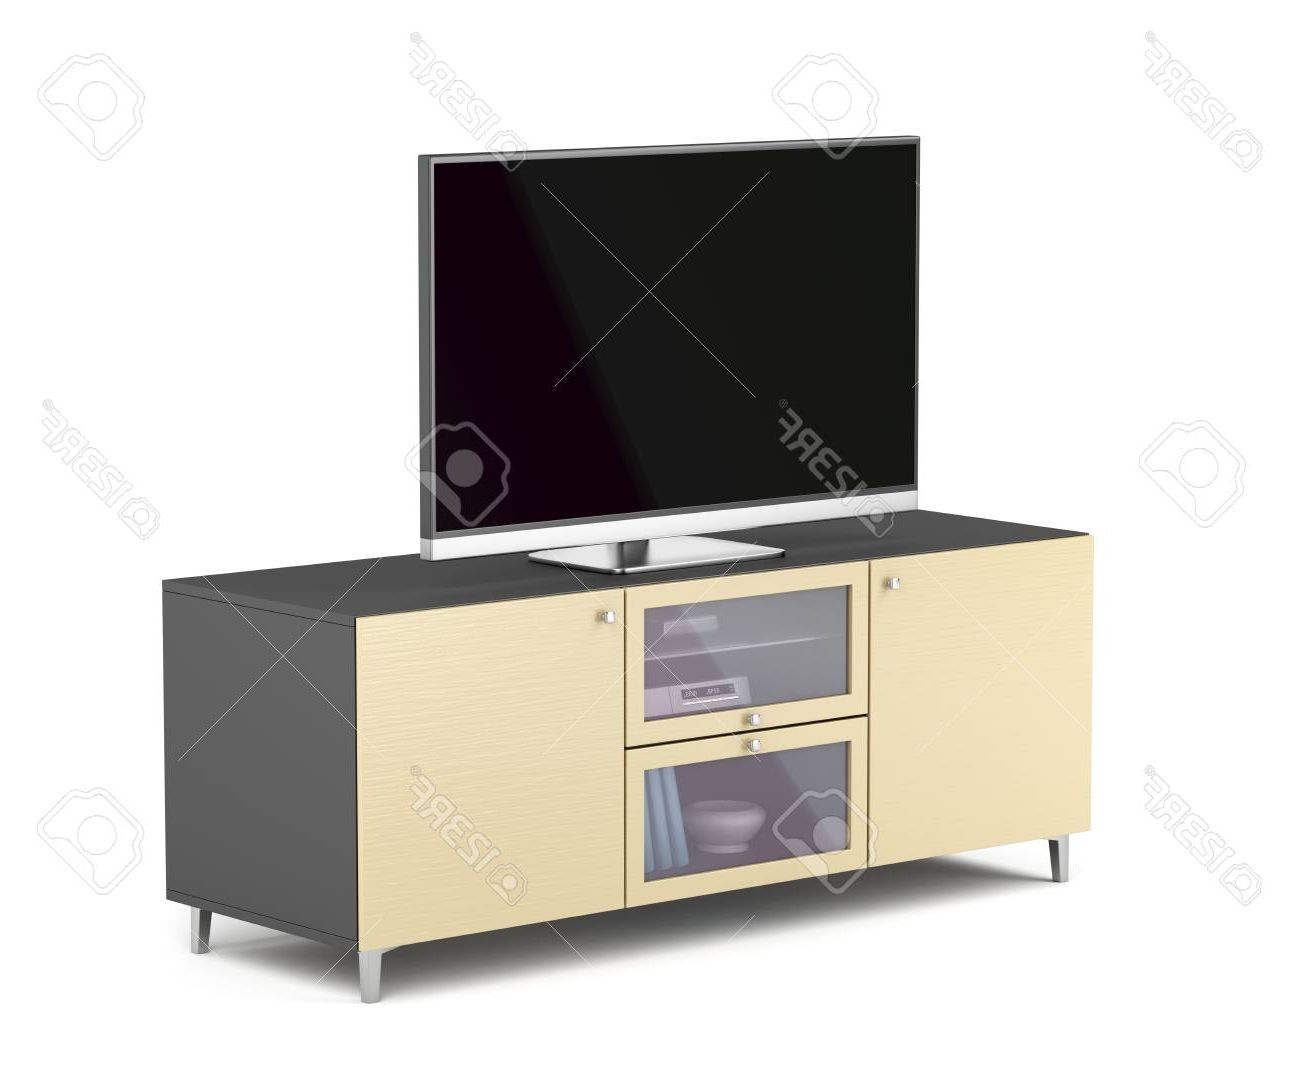 Flat Screen Tv On Modern Tv Stand, 3d Illustration Stock Photo Pertaining To Fashionable Modern Tv Stands For Flat Screens (View 18 of 20)